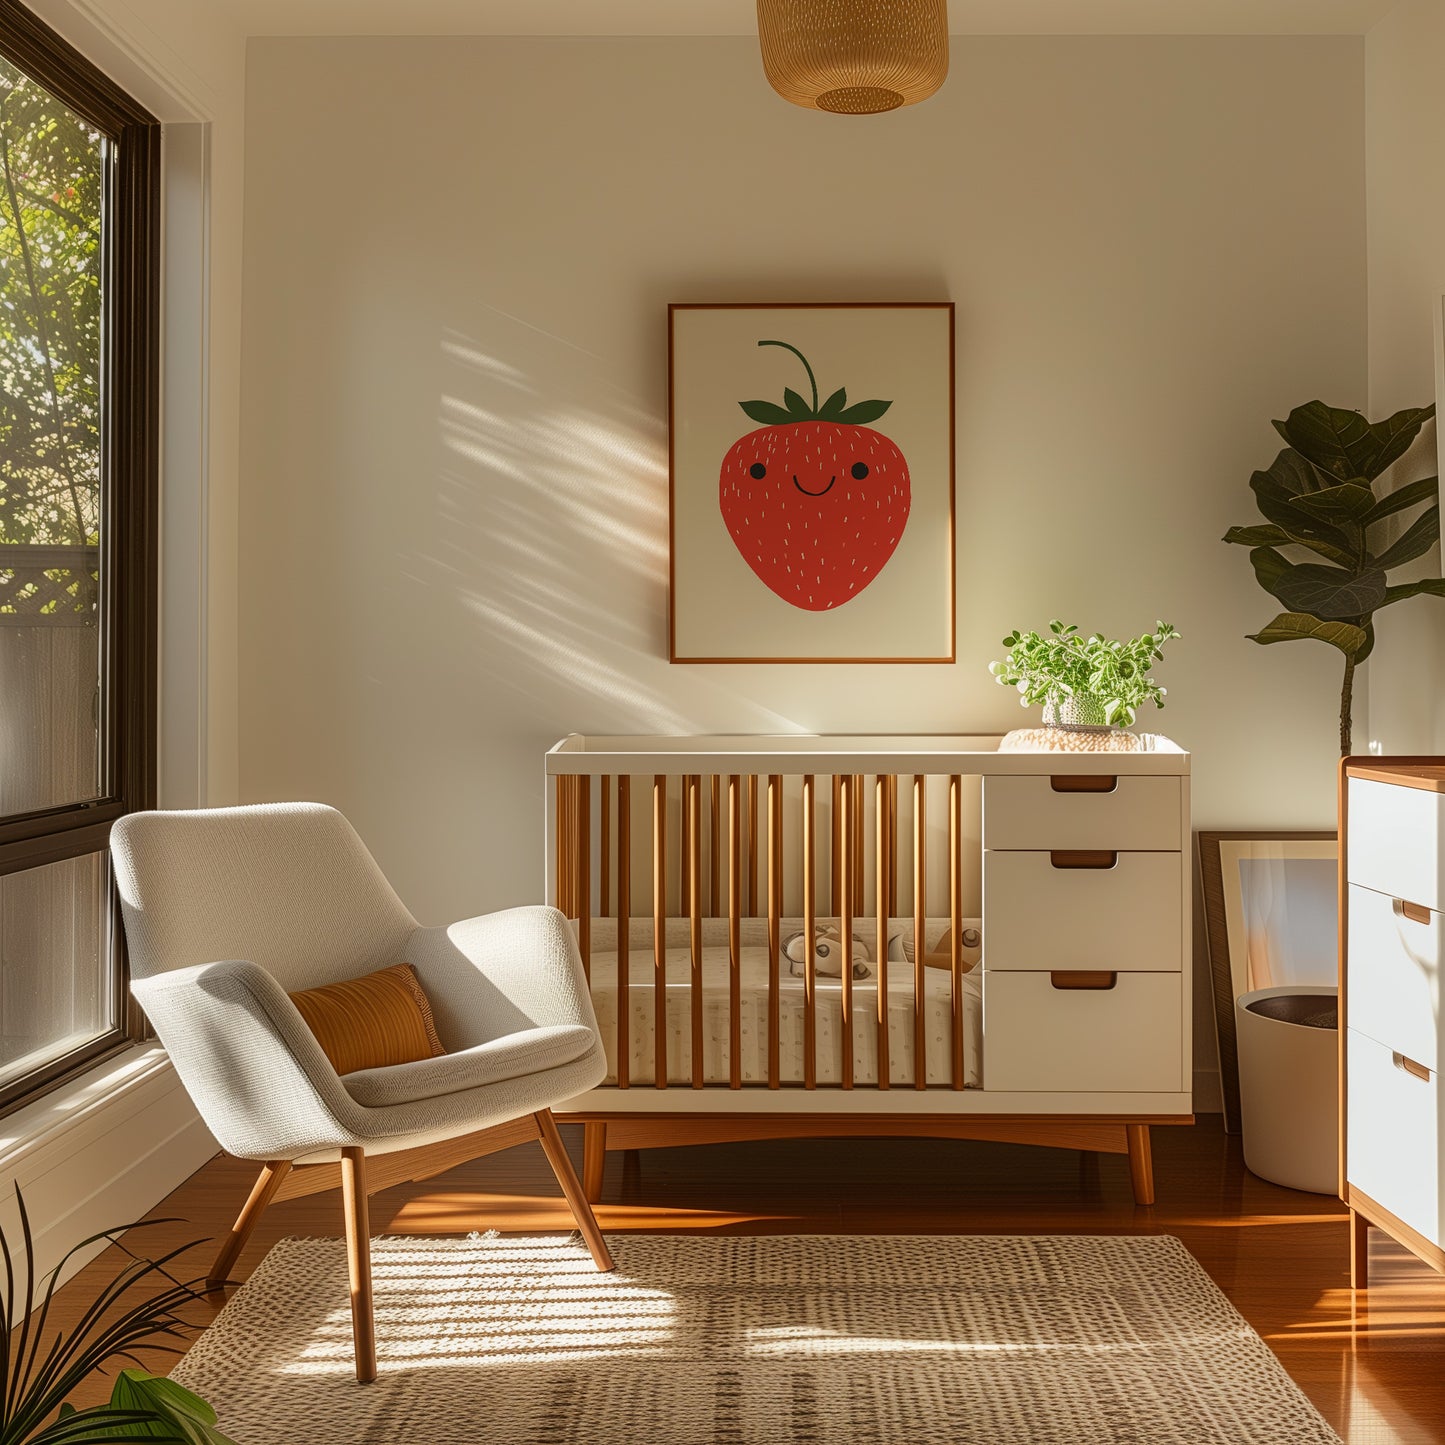 A cozy nursery with a crib, armchair, and strawberry artwork on the wall.